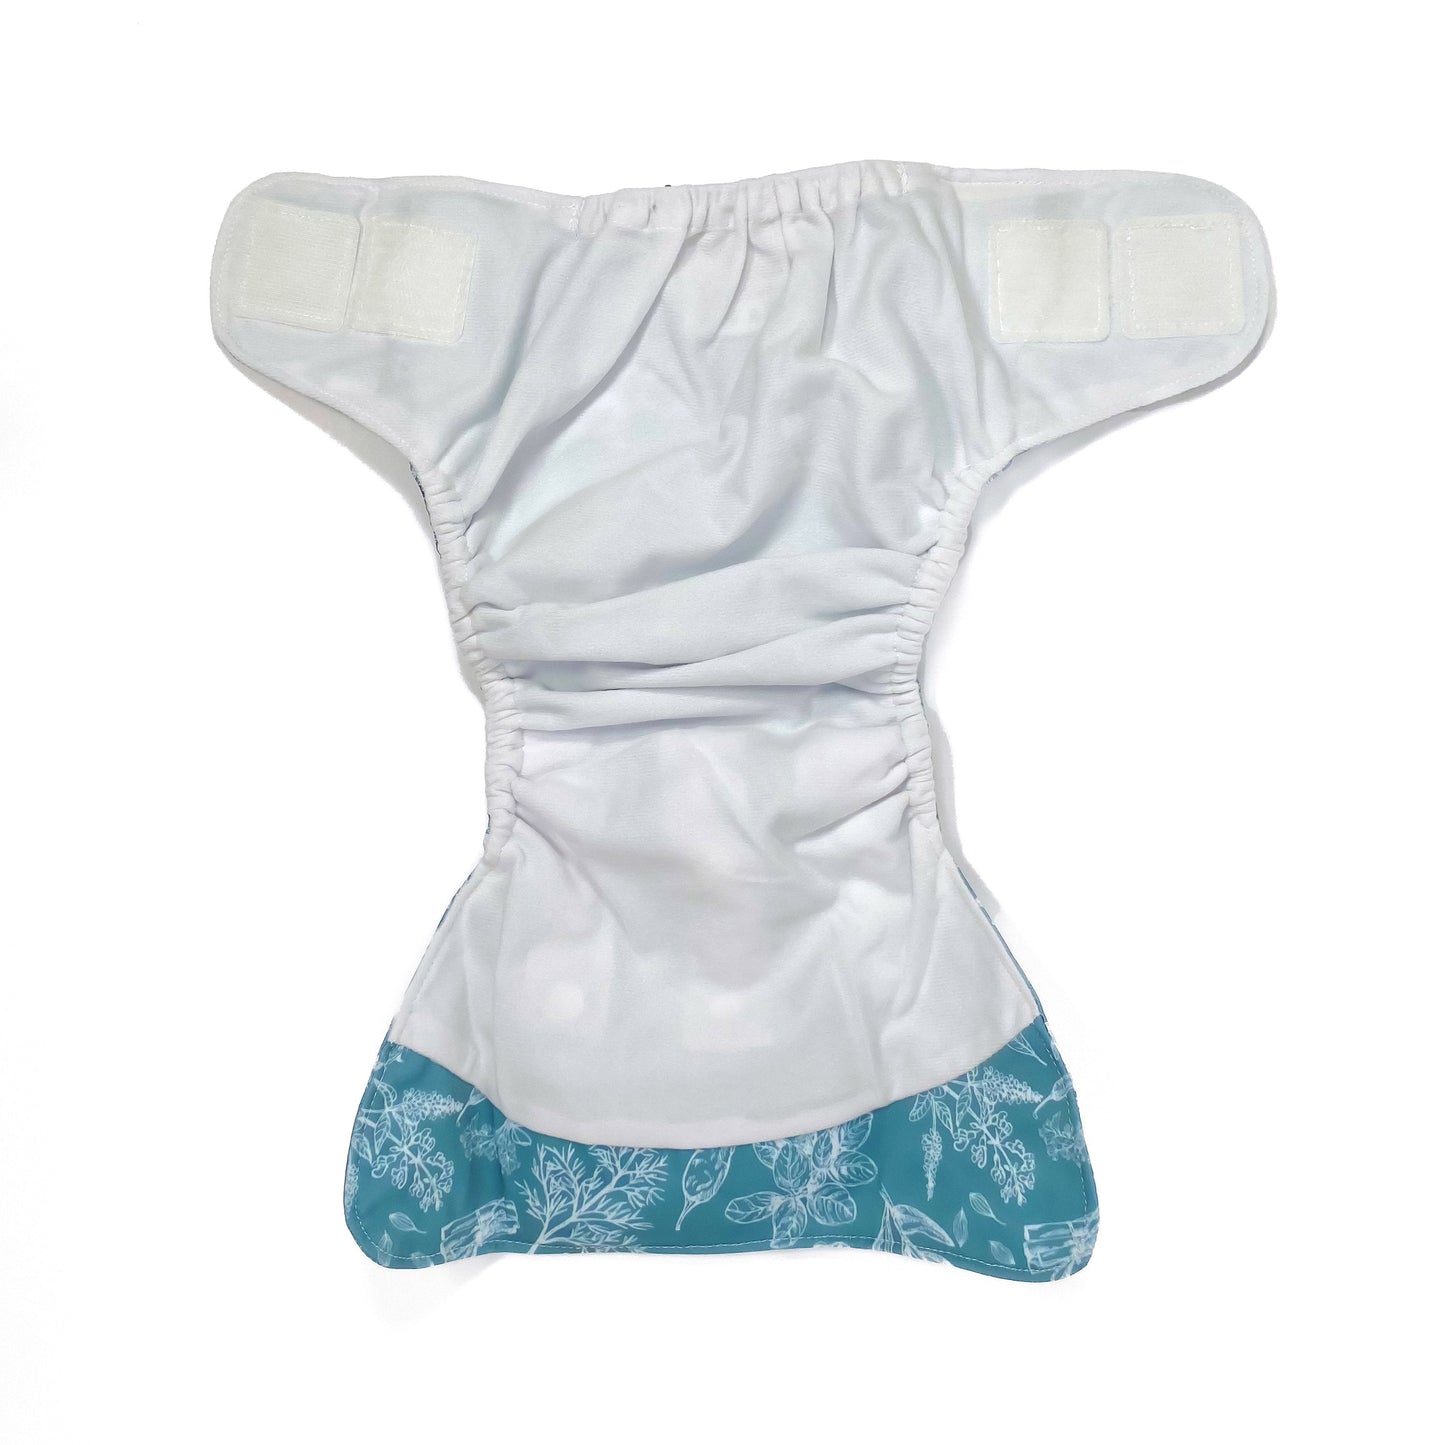 An adjustable reusable nappy for babies and toddlers, featuring a blue harvest design, with white images of various crops on a blue background. View shows the inside fabric of the nappy.